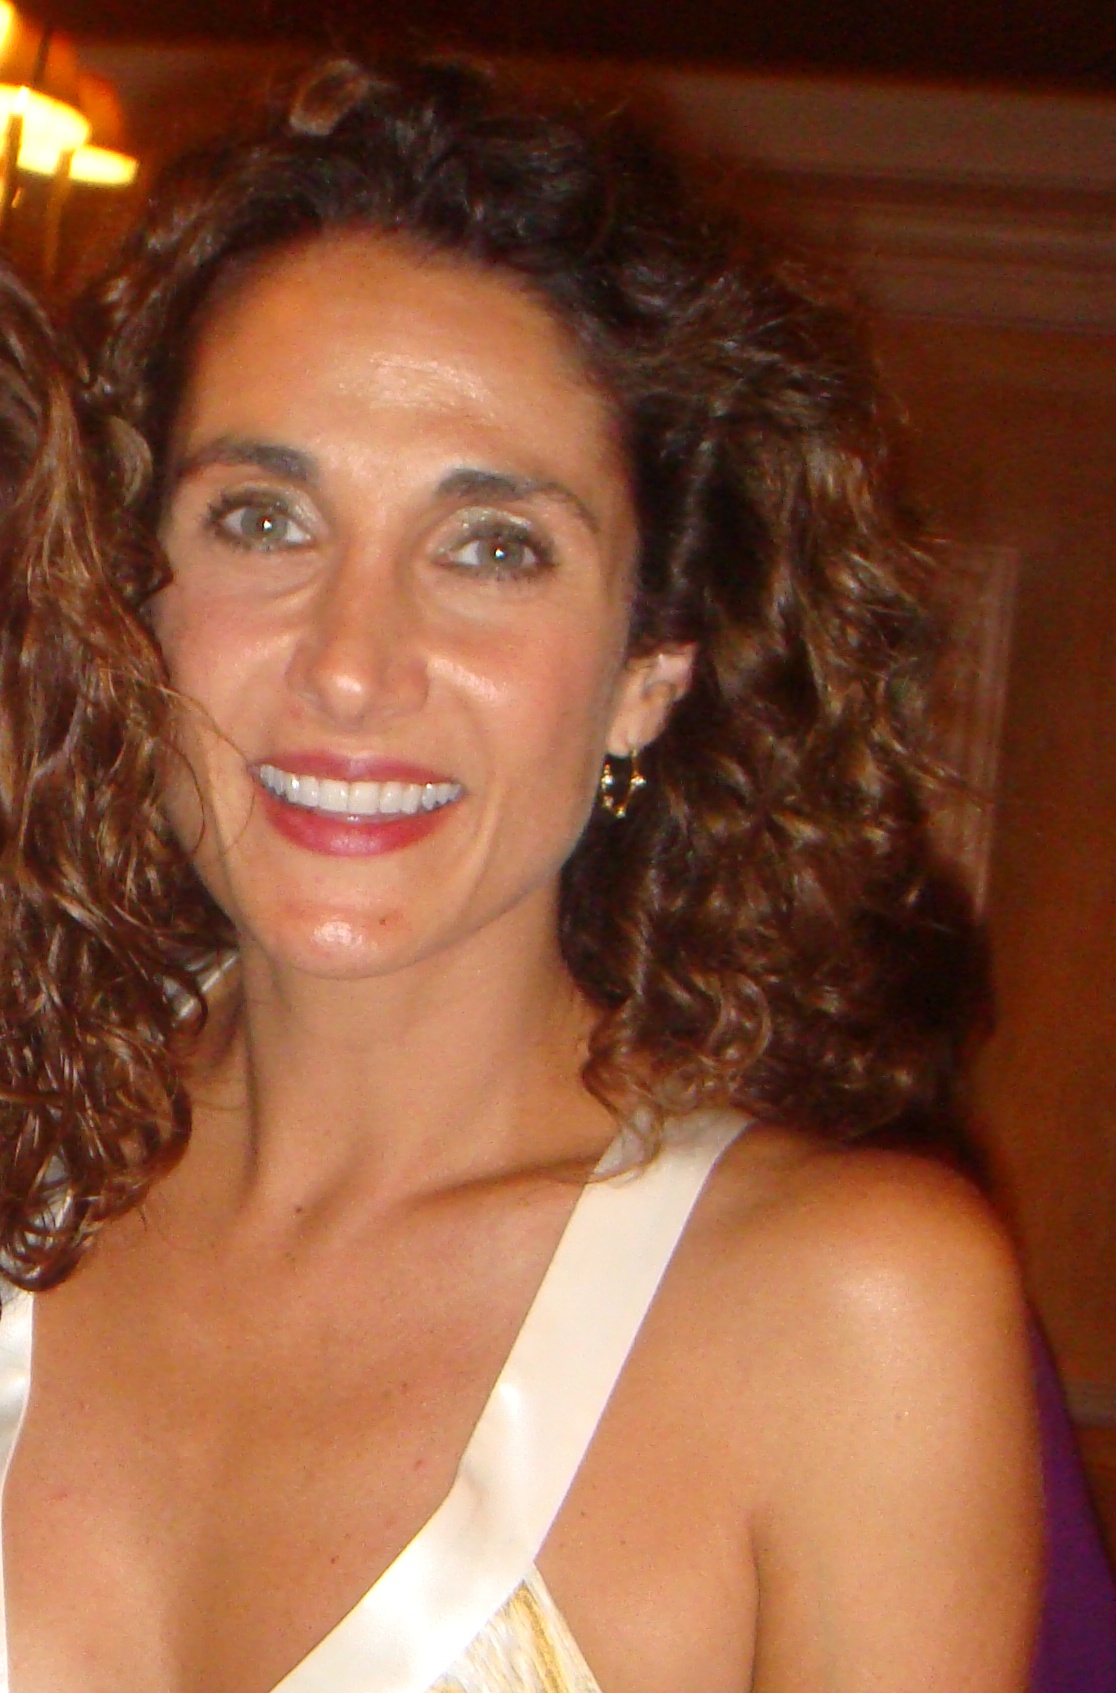 anand abhishek recommends Melina Kanakaredes Nude Videos